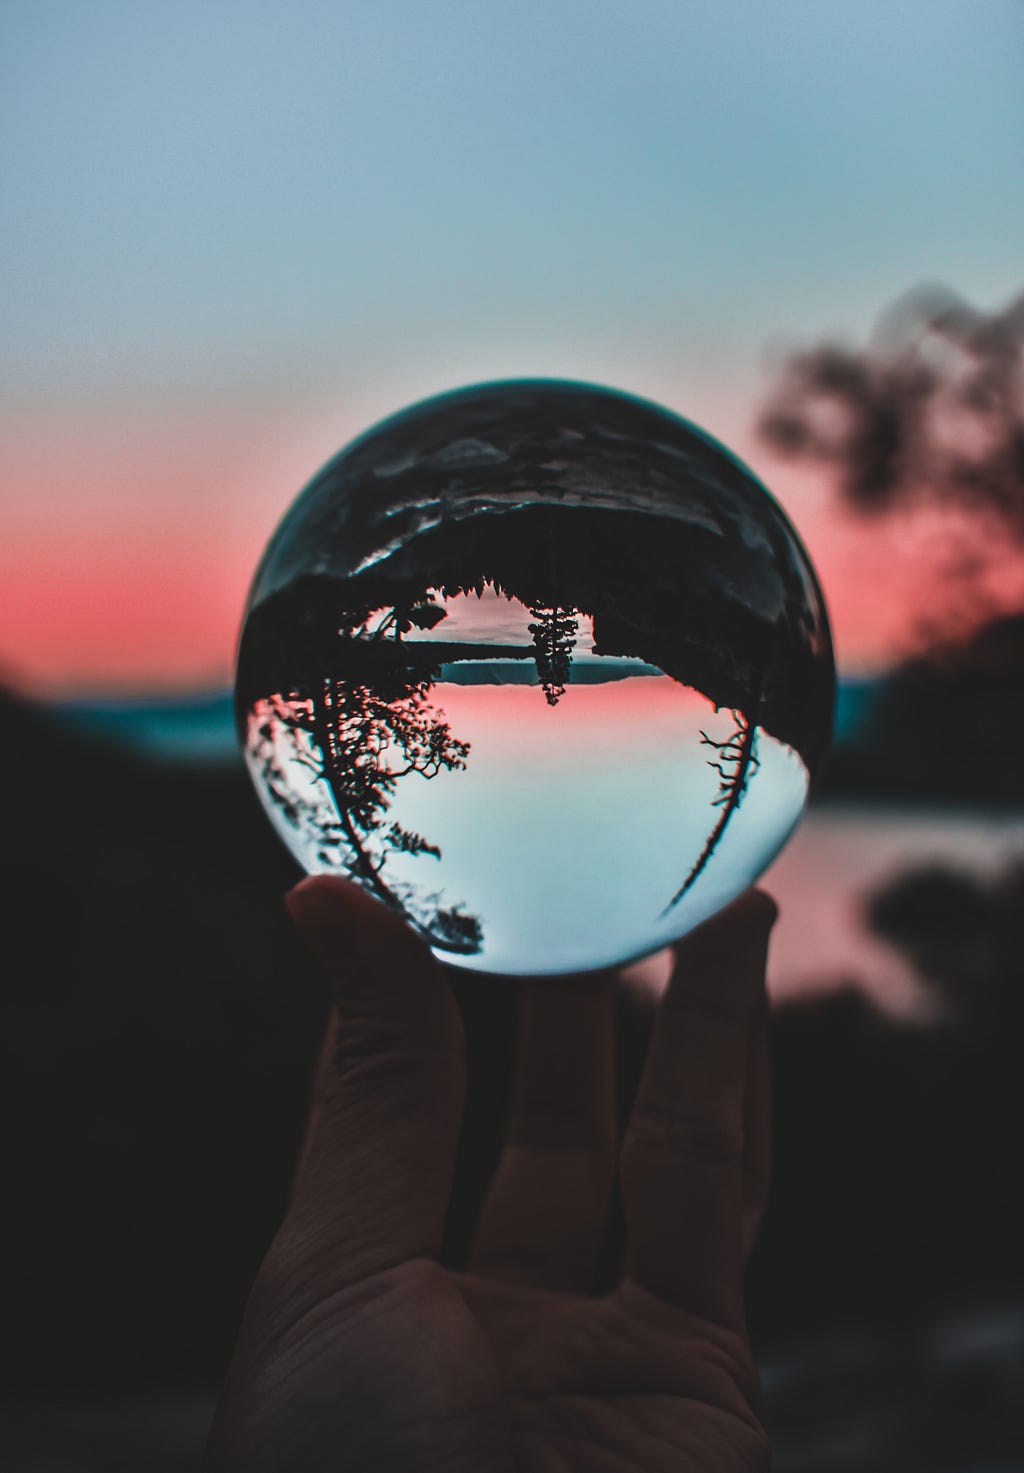 A crystal clear glass ball being held in front of a dusky pink, wooded, and mountainous lake landscape. The background image of the landscape is out of focus, and the inverted+spherically warped image of the same landscape can be seen in focus within the foreground image of the glass ball.